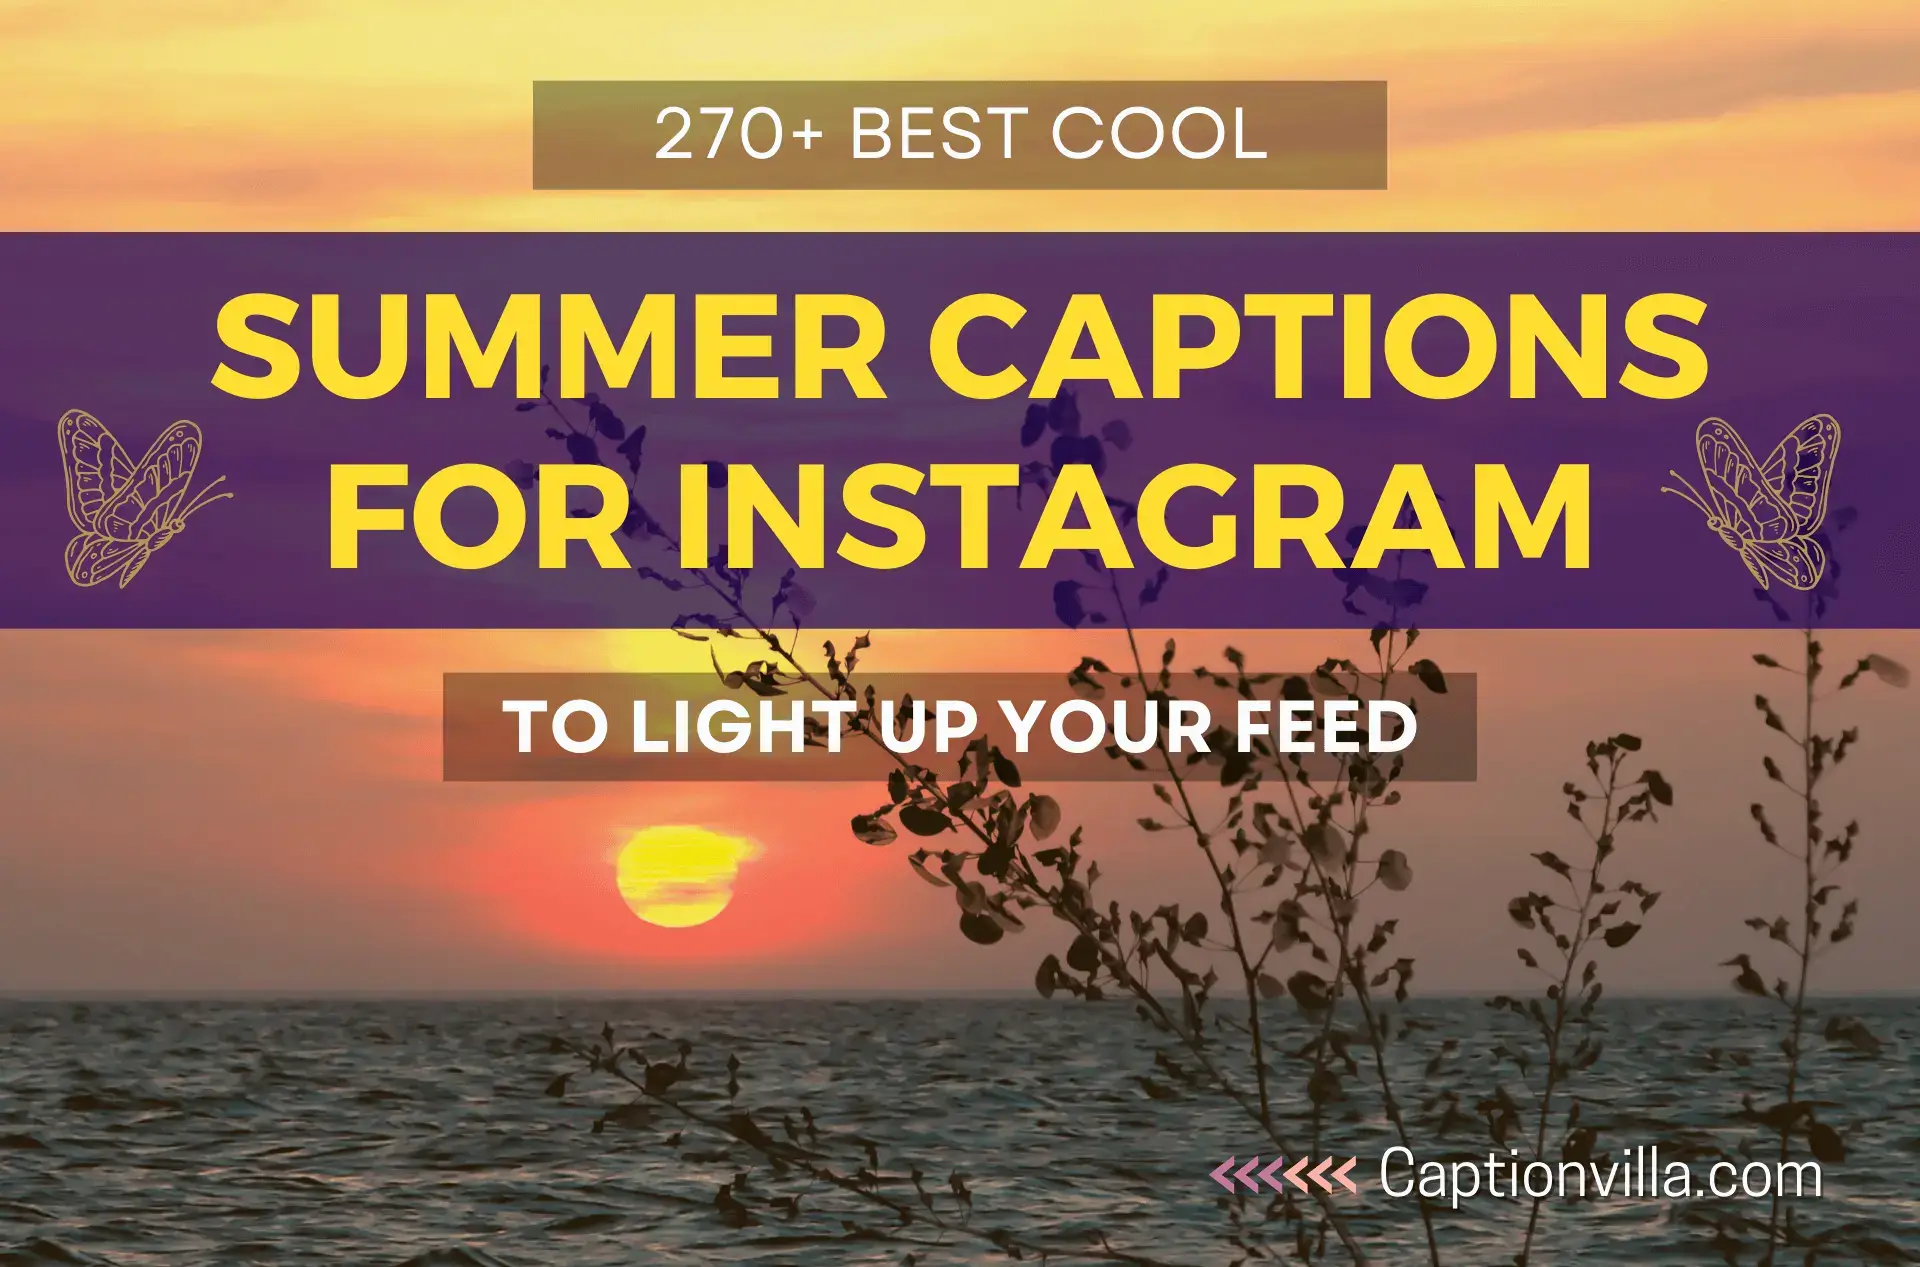 270+ Best Cool Summer Captions for Instagram That Will Make Your Followers Swipe Right